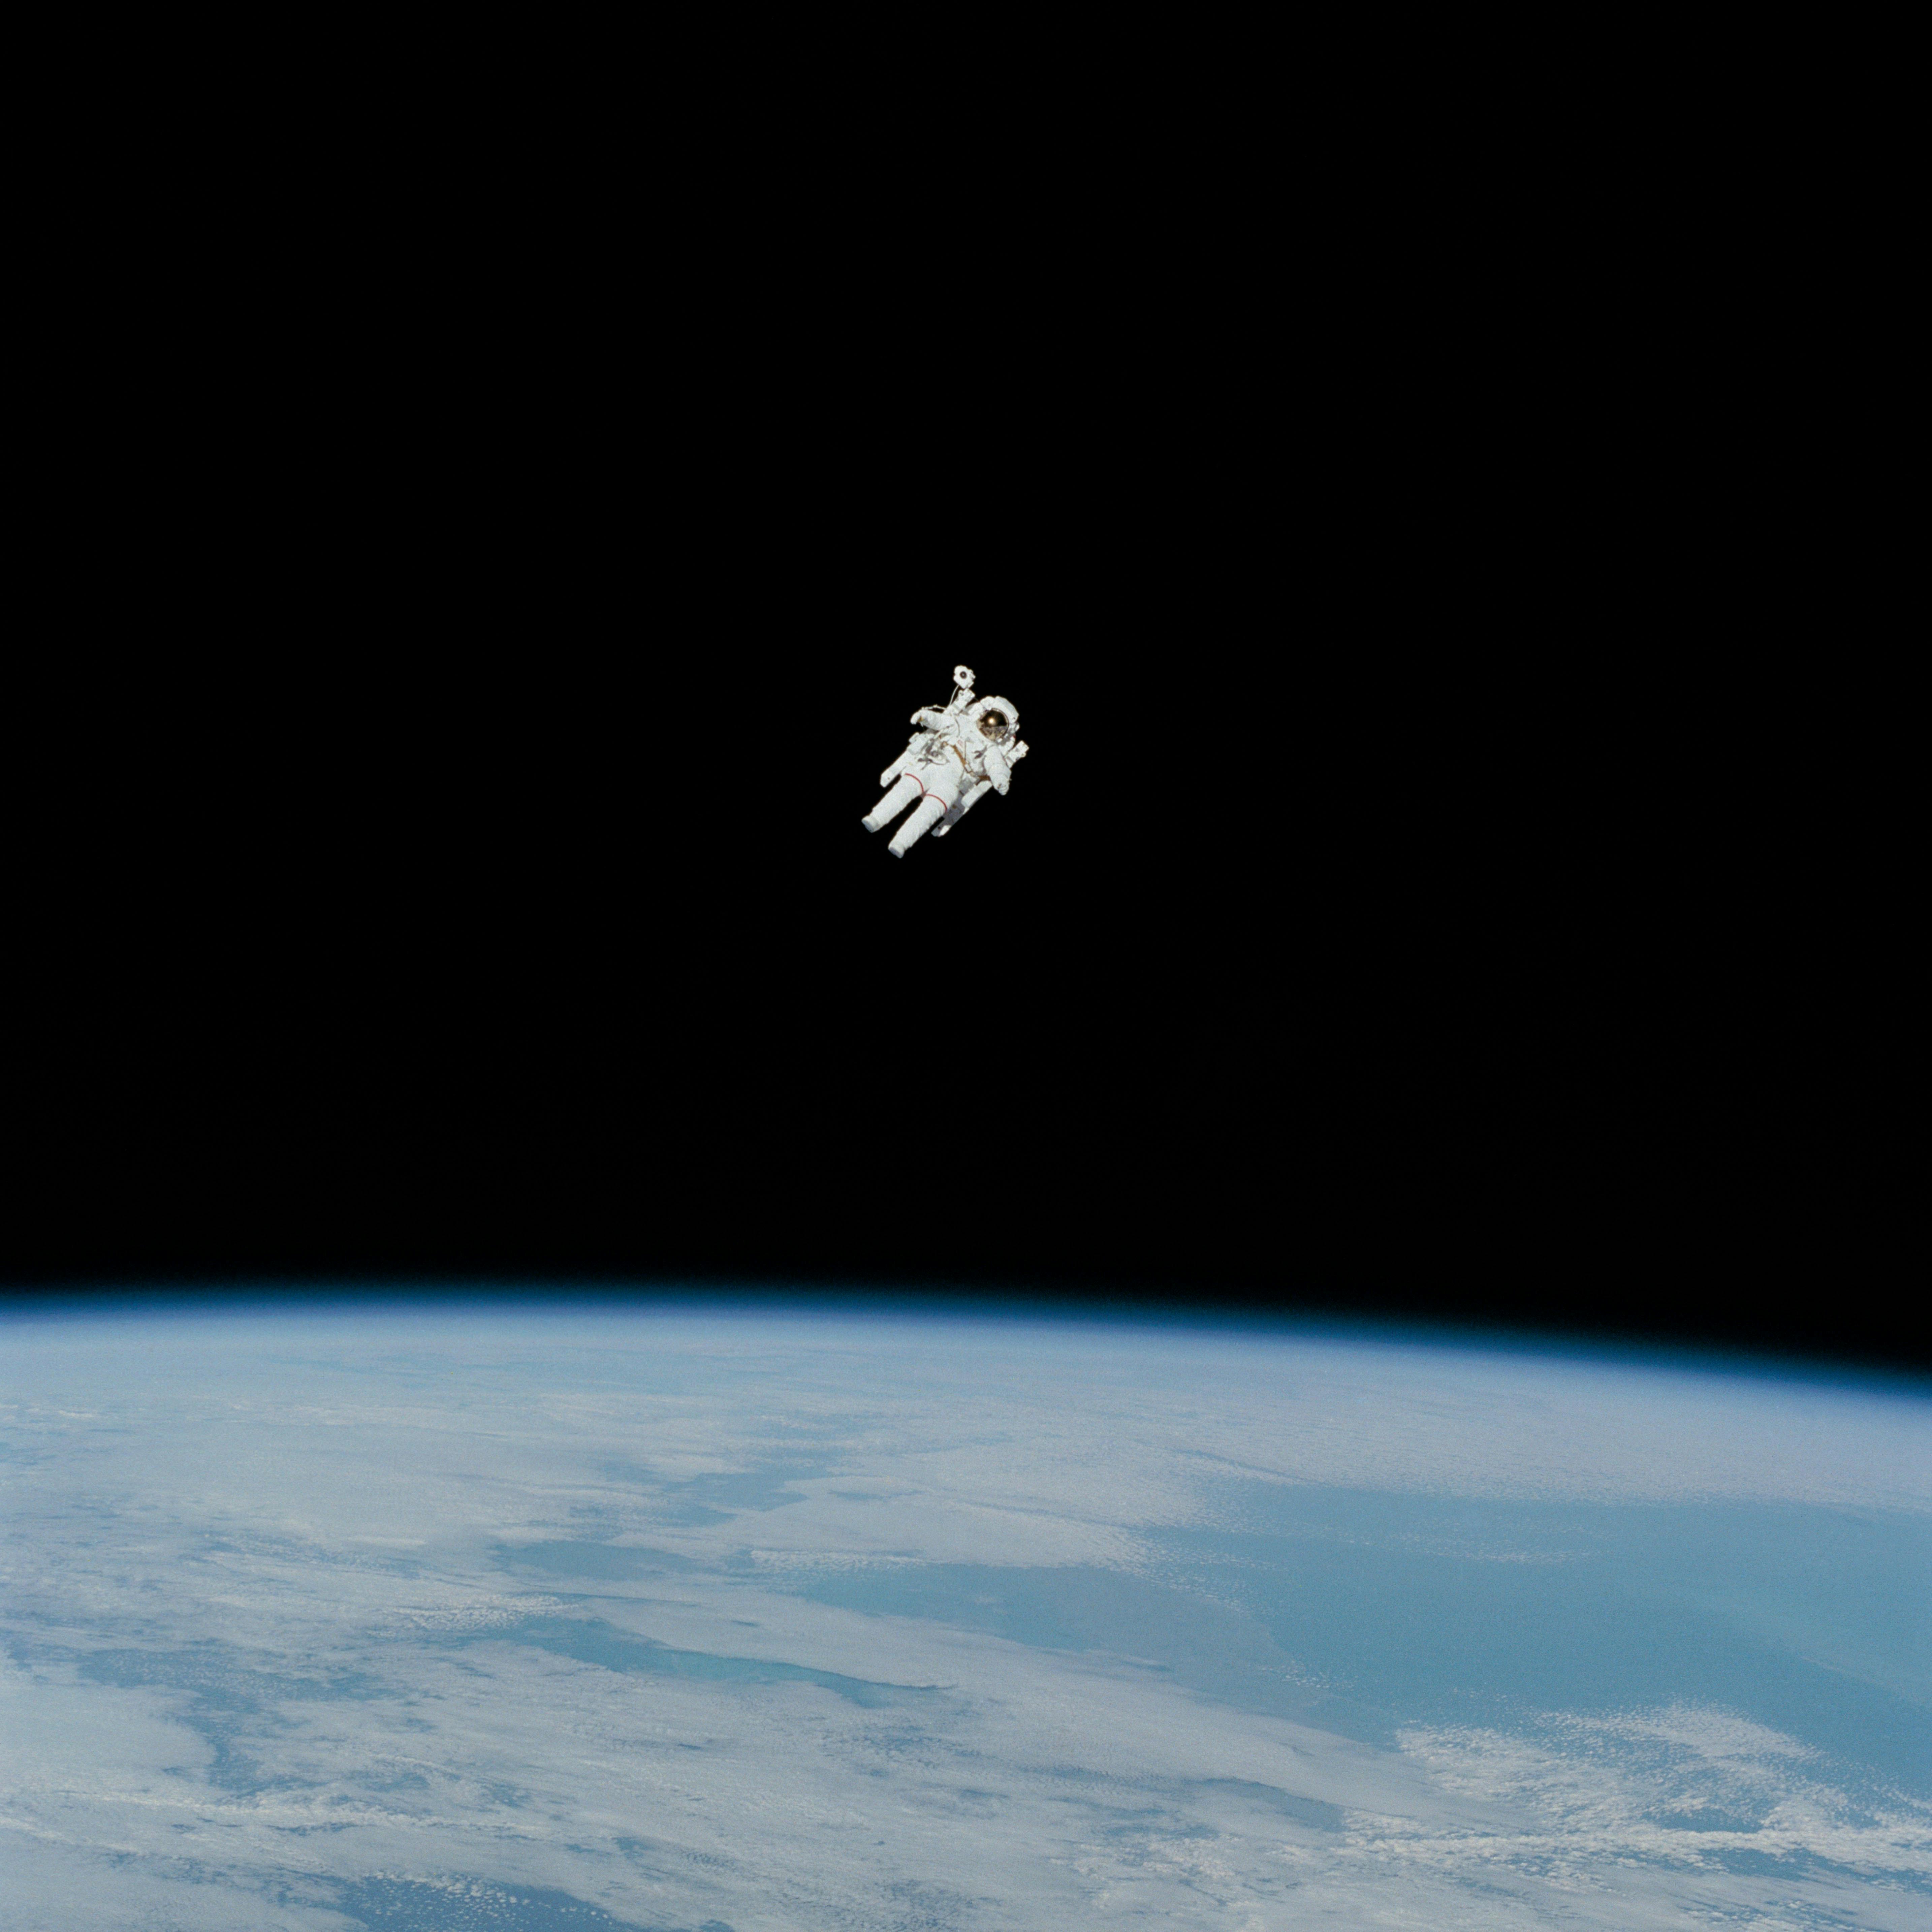 Photo by <a href="https://unsplash.com/@nasa?utm_content=creditCopyText&utm_medium=referral&utm_source=unsplash">NASA</a> on <a href="https://unsplash.com/photos/astronaut-in-spacesuit-floating-in-space-Yj1M5riCKk4?utm_content=creditCopyText&utm_medium=referral&utm_source=unsplash">Unsplash</a>   